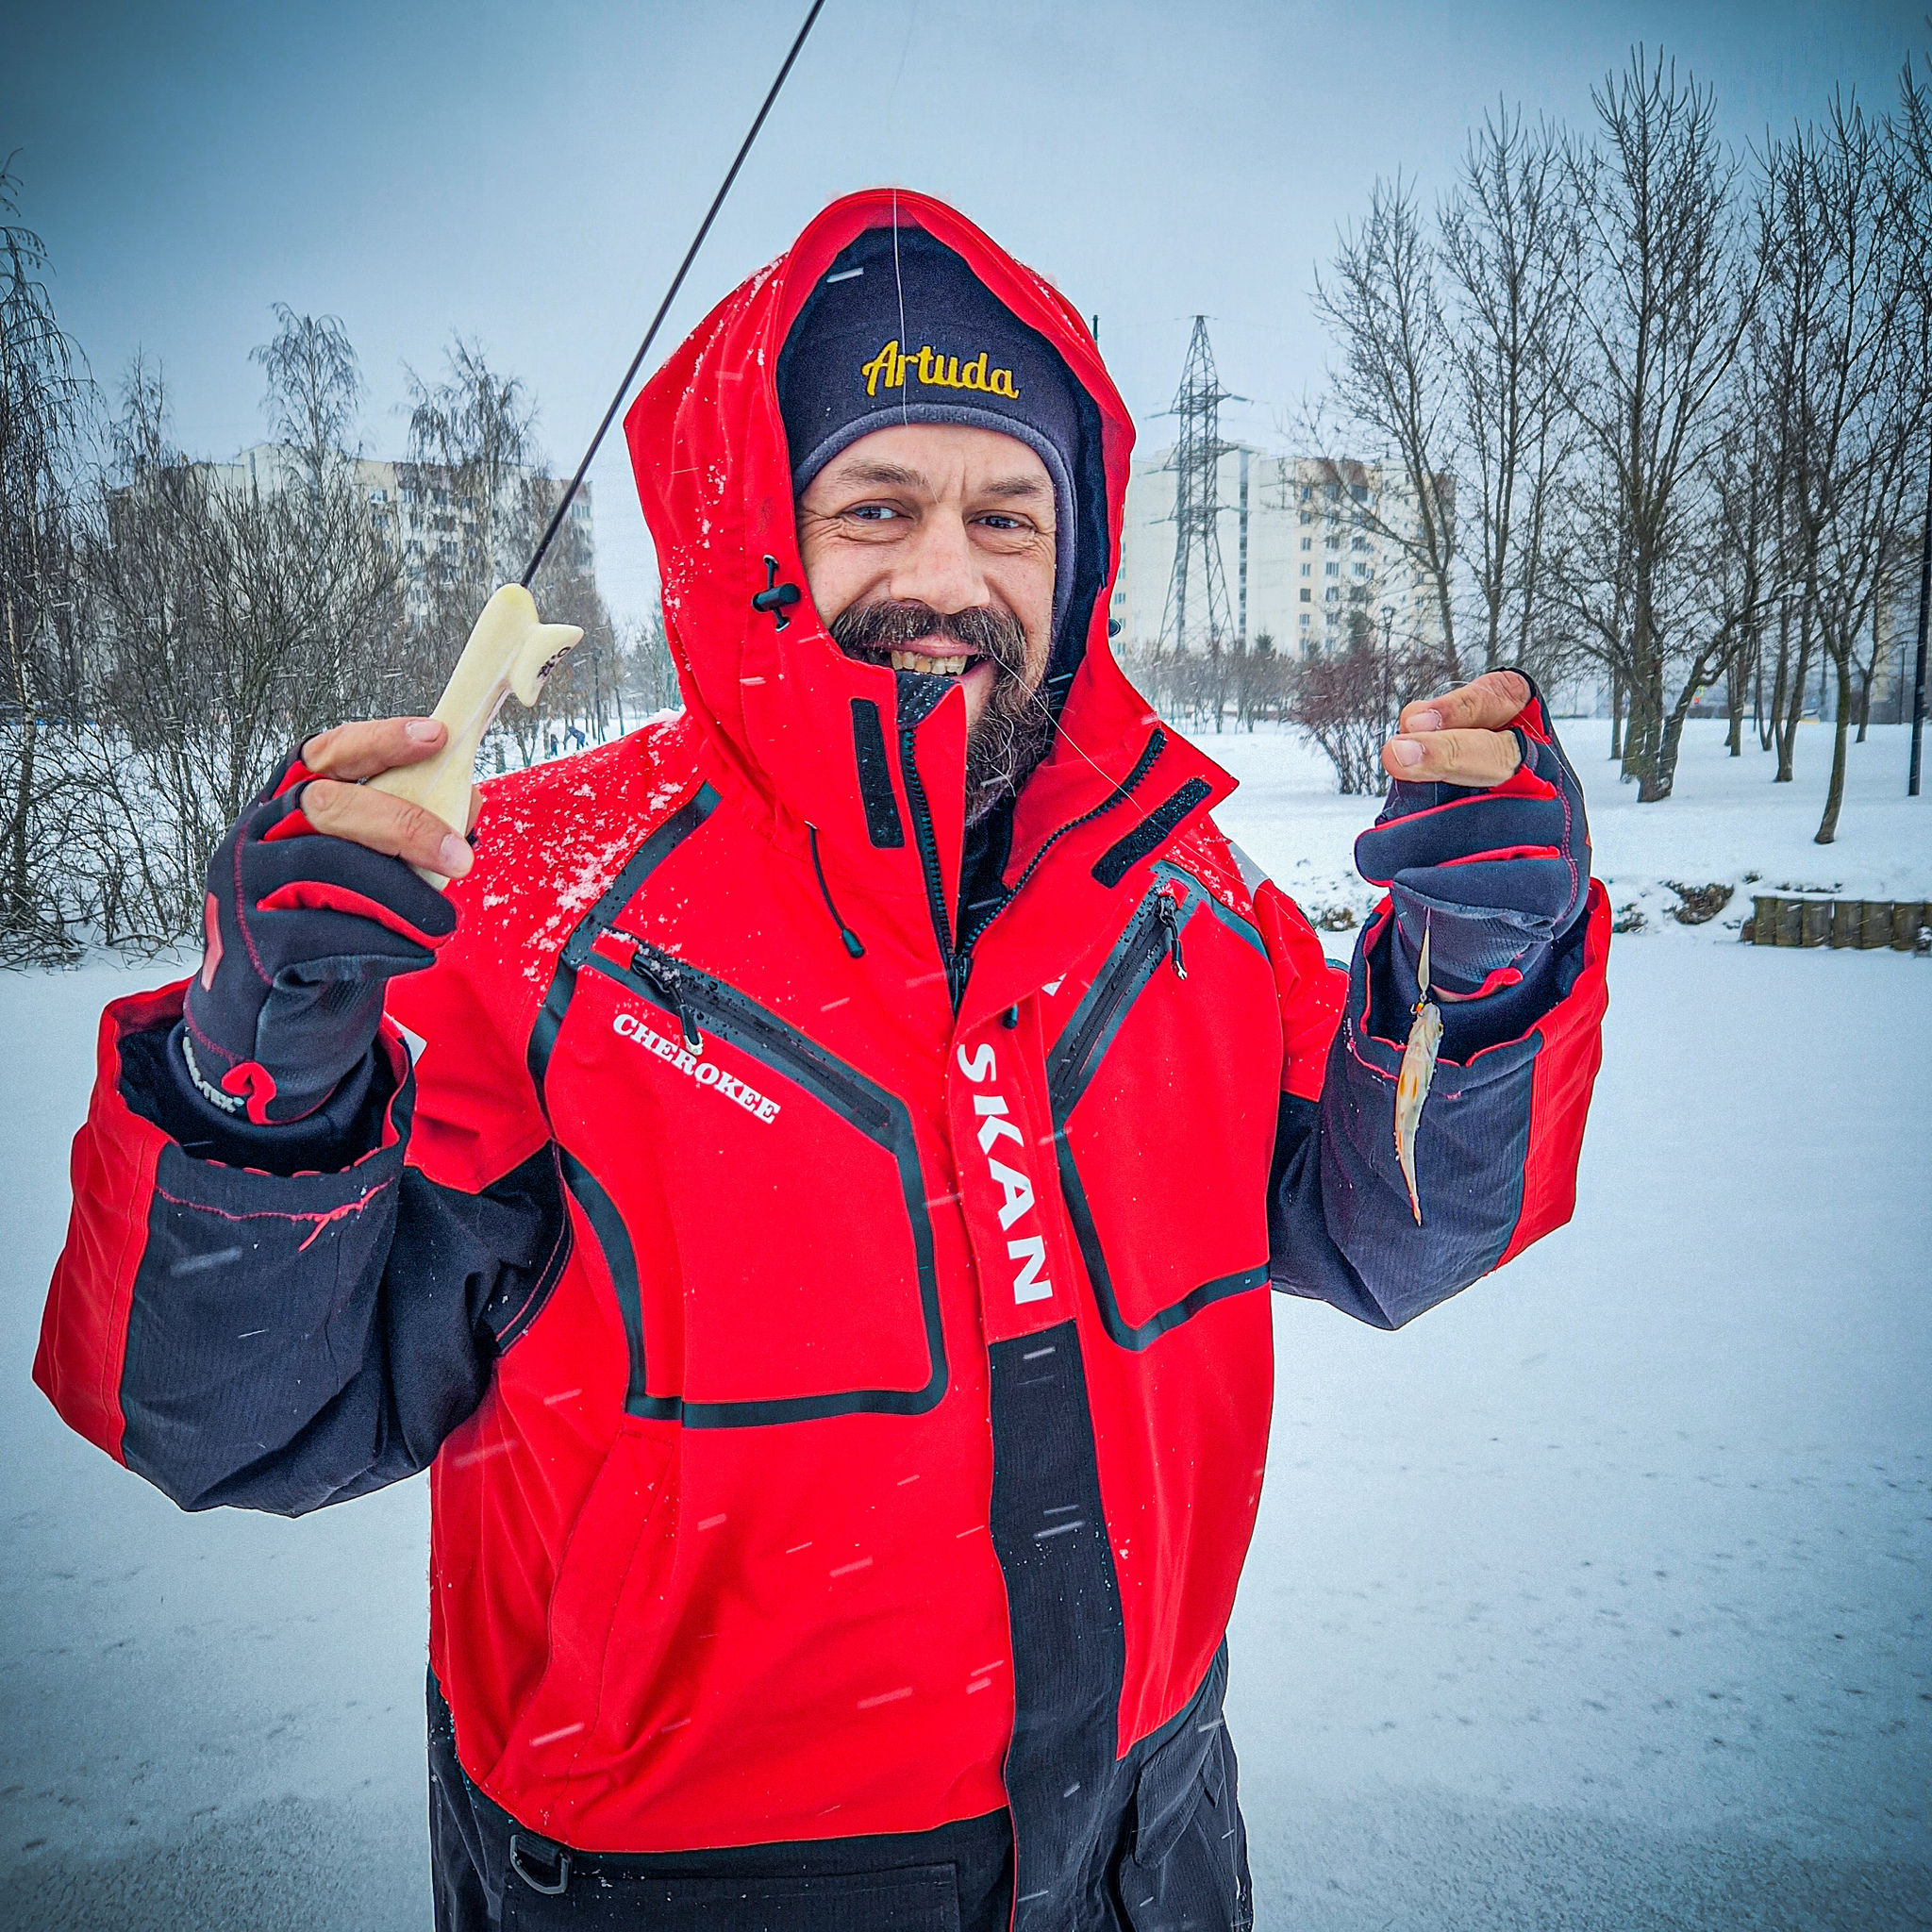 How to open the winter fishing season and not to swim - My, Winter, Winter fishing, Fishing, Hunting and fishing, Perch, Spoon, Fishing rod, Safety, Safety engineering, Video, Longpost